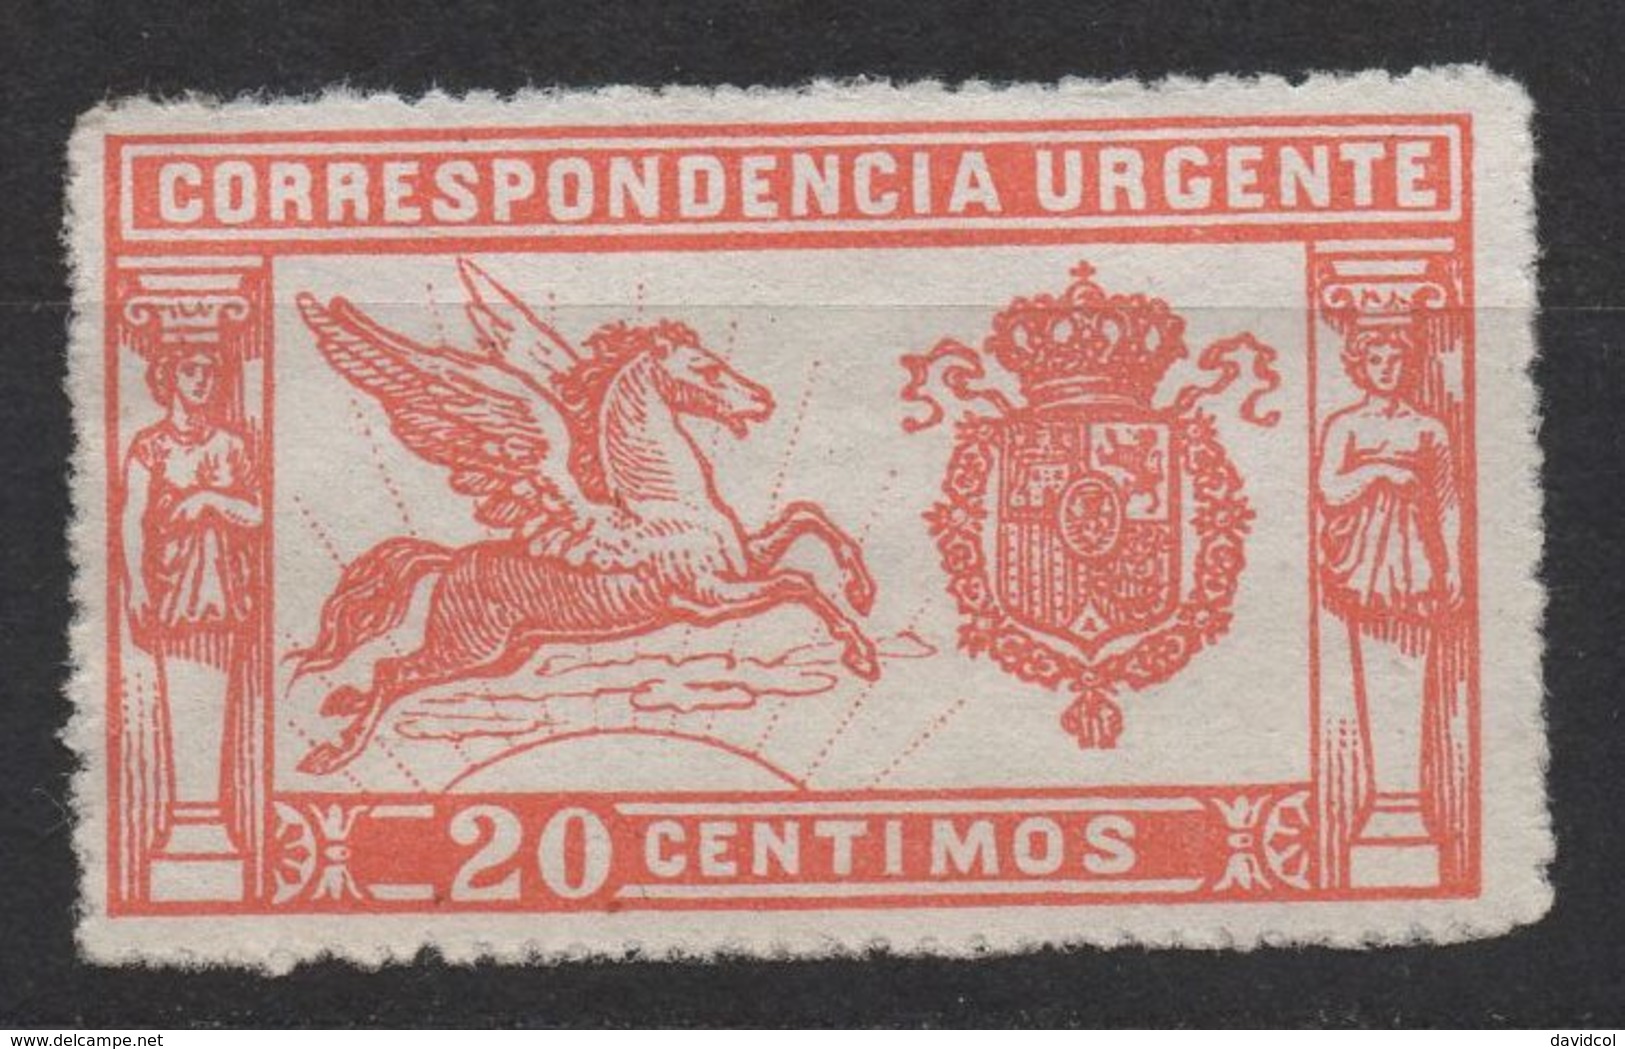 Q642.-. SPAIN - 1905 .-. SC#: E1 . MNG .  PEGASUS - SPECIAL DELIVERY STAMP - SCV:US$ 45.00 - Special Delivery